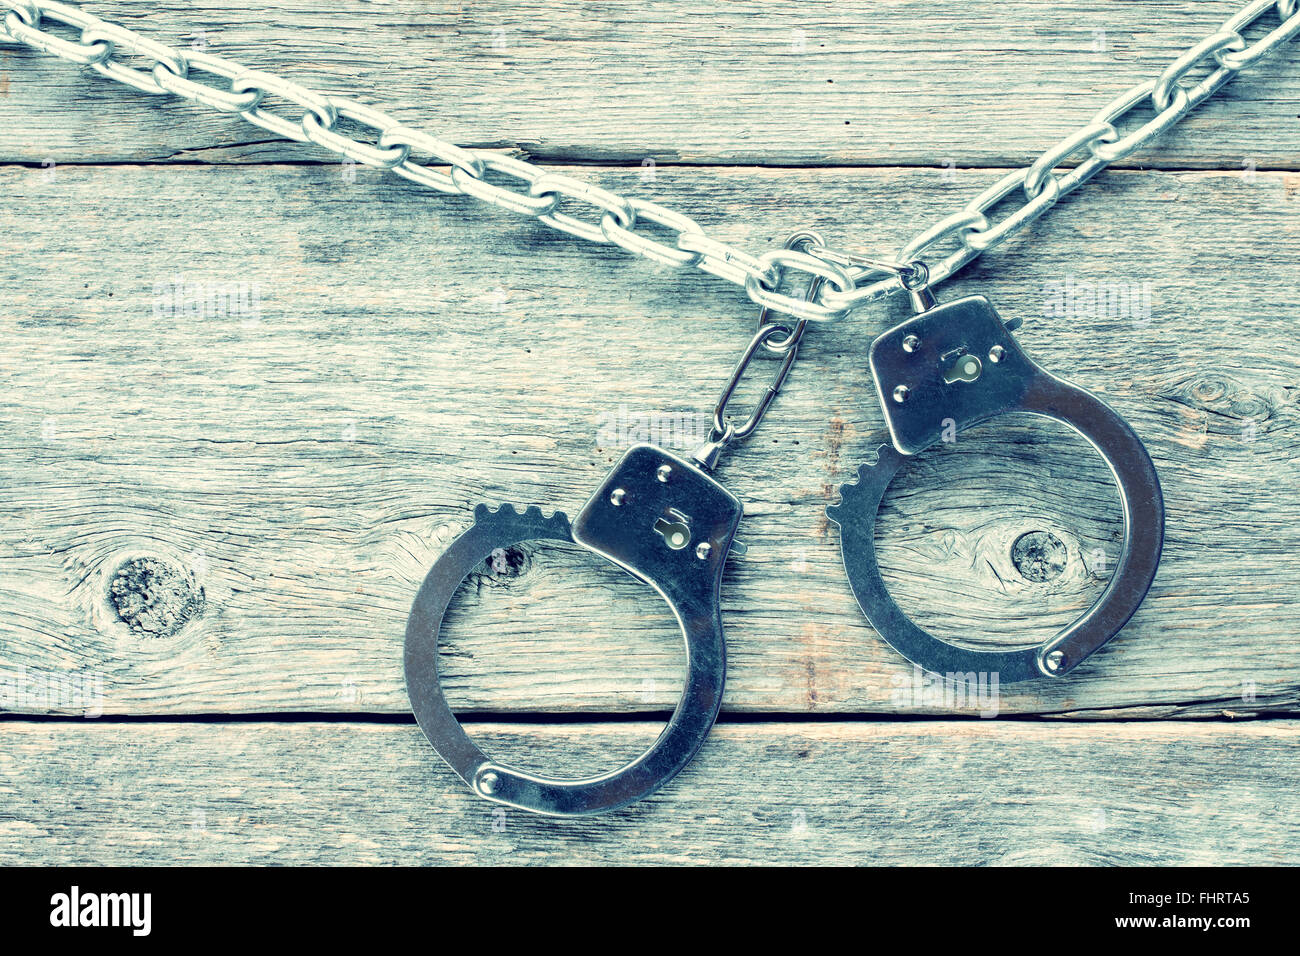 Handcuffs hanging on the chain against wooden wall.Filtered image. Stock Photo